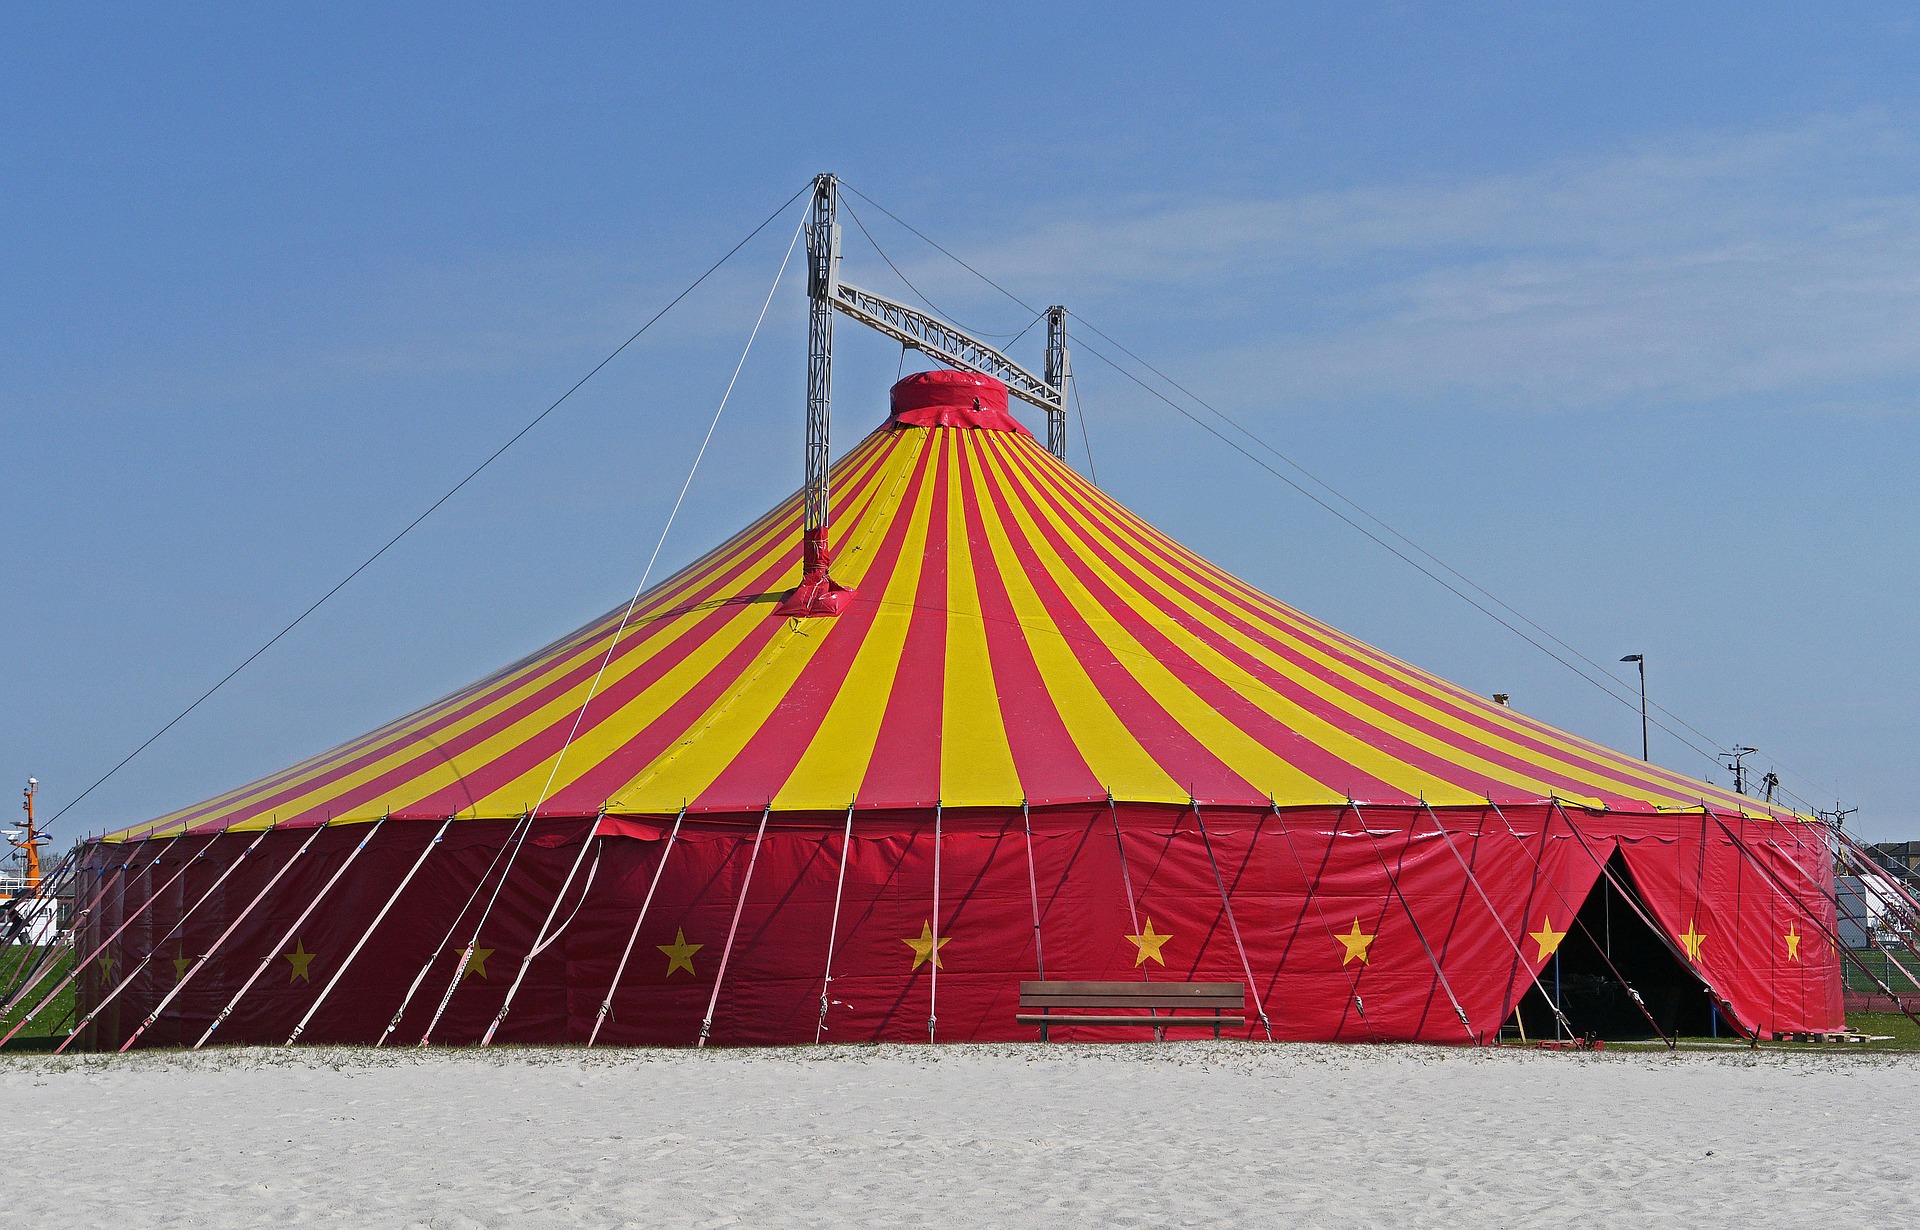 Circus tent is example of fabric structures erected by event labour hire.